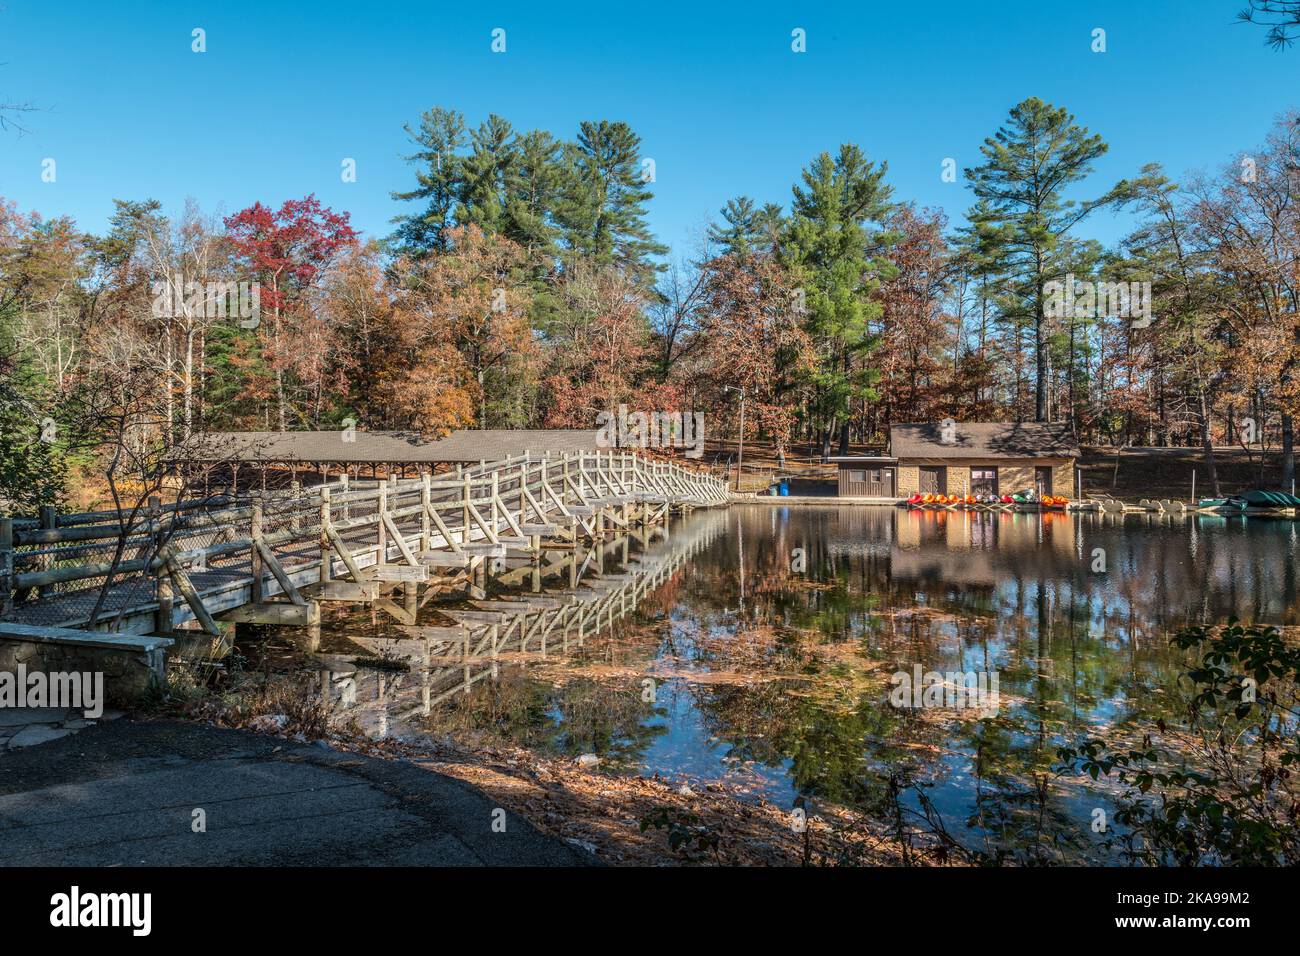 Crossing over the wooden bridge across from the boat rentals on Byrd lake in the Cumberland mountain state park in Tennessee on a bright sunny day in Stock Photo